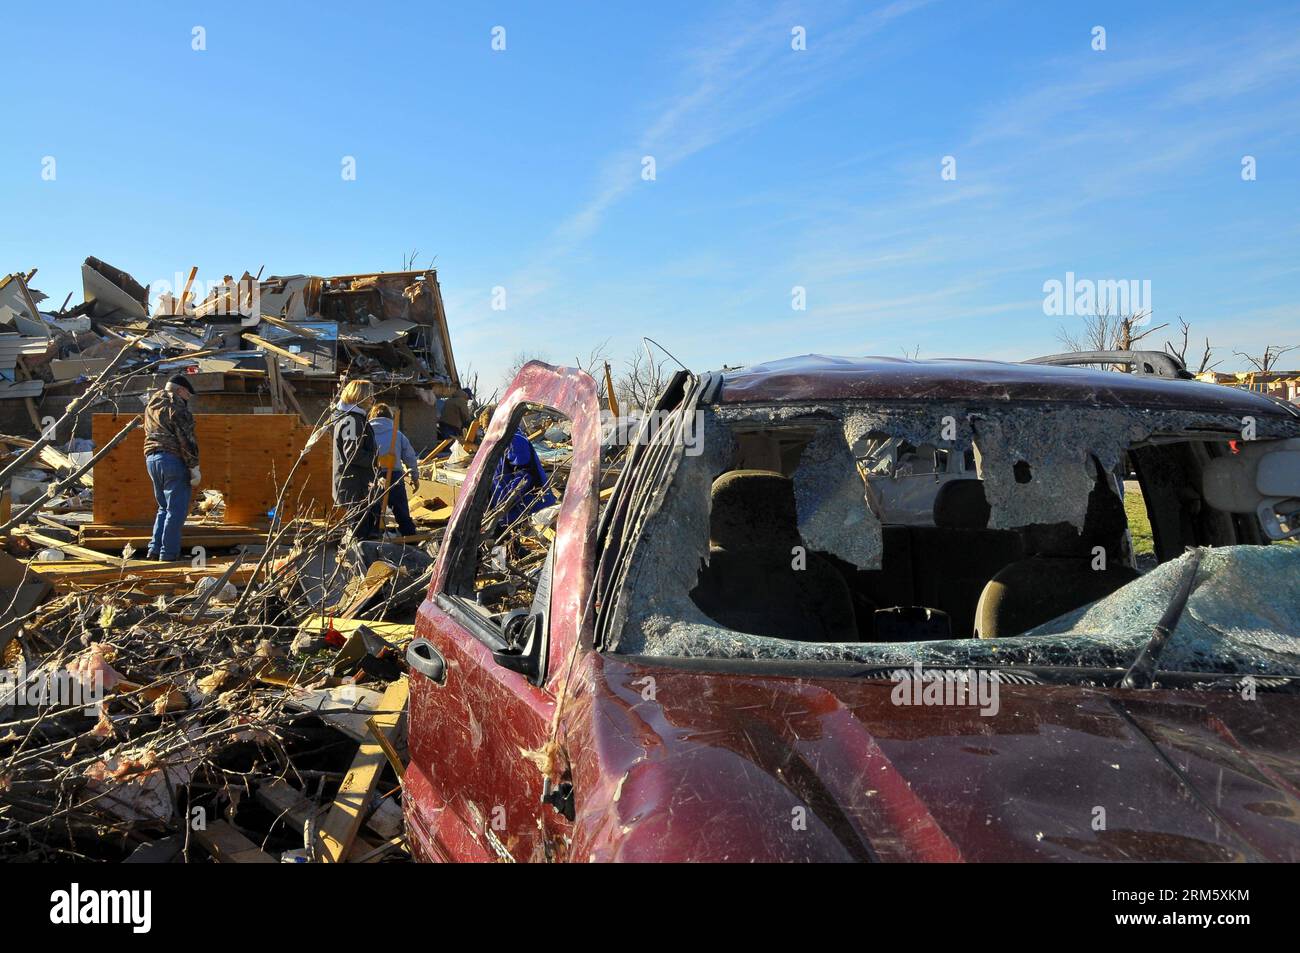 Bildnummer: 60732980  Datum: 19.11.2013  Copyright: imago/Xinhua ILLINOIS, Nov. 19, 2013 (Xinhua) -- Local residents work in ruins after a tornado attack in the town of Washington in Illinois, the United States, on Nov. 19, 2013. At least 16 were killed during tornado attacks on Sunday, according to the National Weather Service. (Xinhua/Zhang Baoping)(ybg) US-ILLINOIS-TORNADO PUBLICATIONxNOTxINxCHN Gesellschaft USA Naturkatastrophe x0x xsk 2013 quer Aufmacher premiumd     60732980 Date 19 11 2013 Copyright Imago XINHUA Illinois Nov 19 2013 XINHUA Local Residents Work in Ruins After a Tornado A Stock Photo